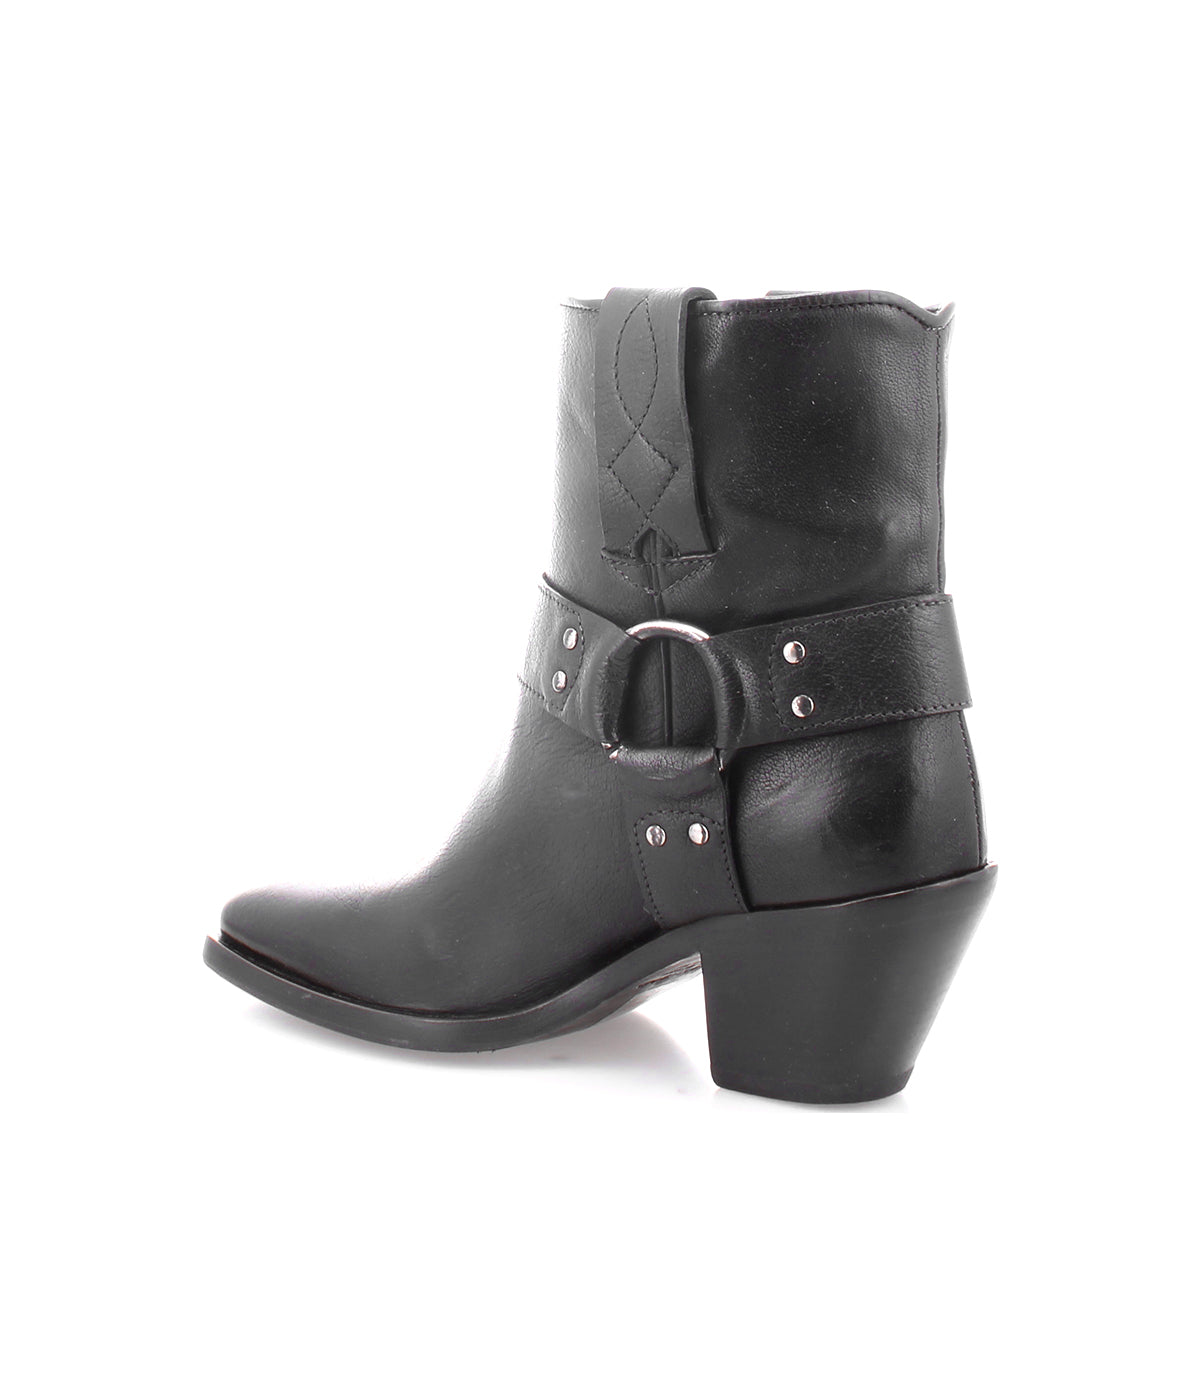 An Italian-made women's black leather ankle boot with buckles and harness details, the Vamoose by Bed Stu.